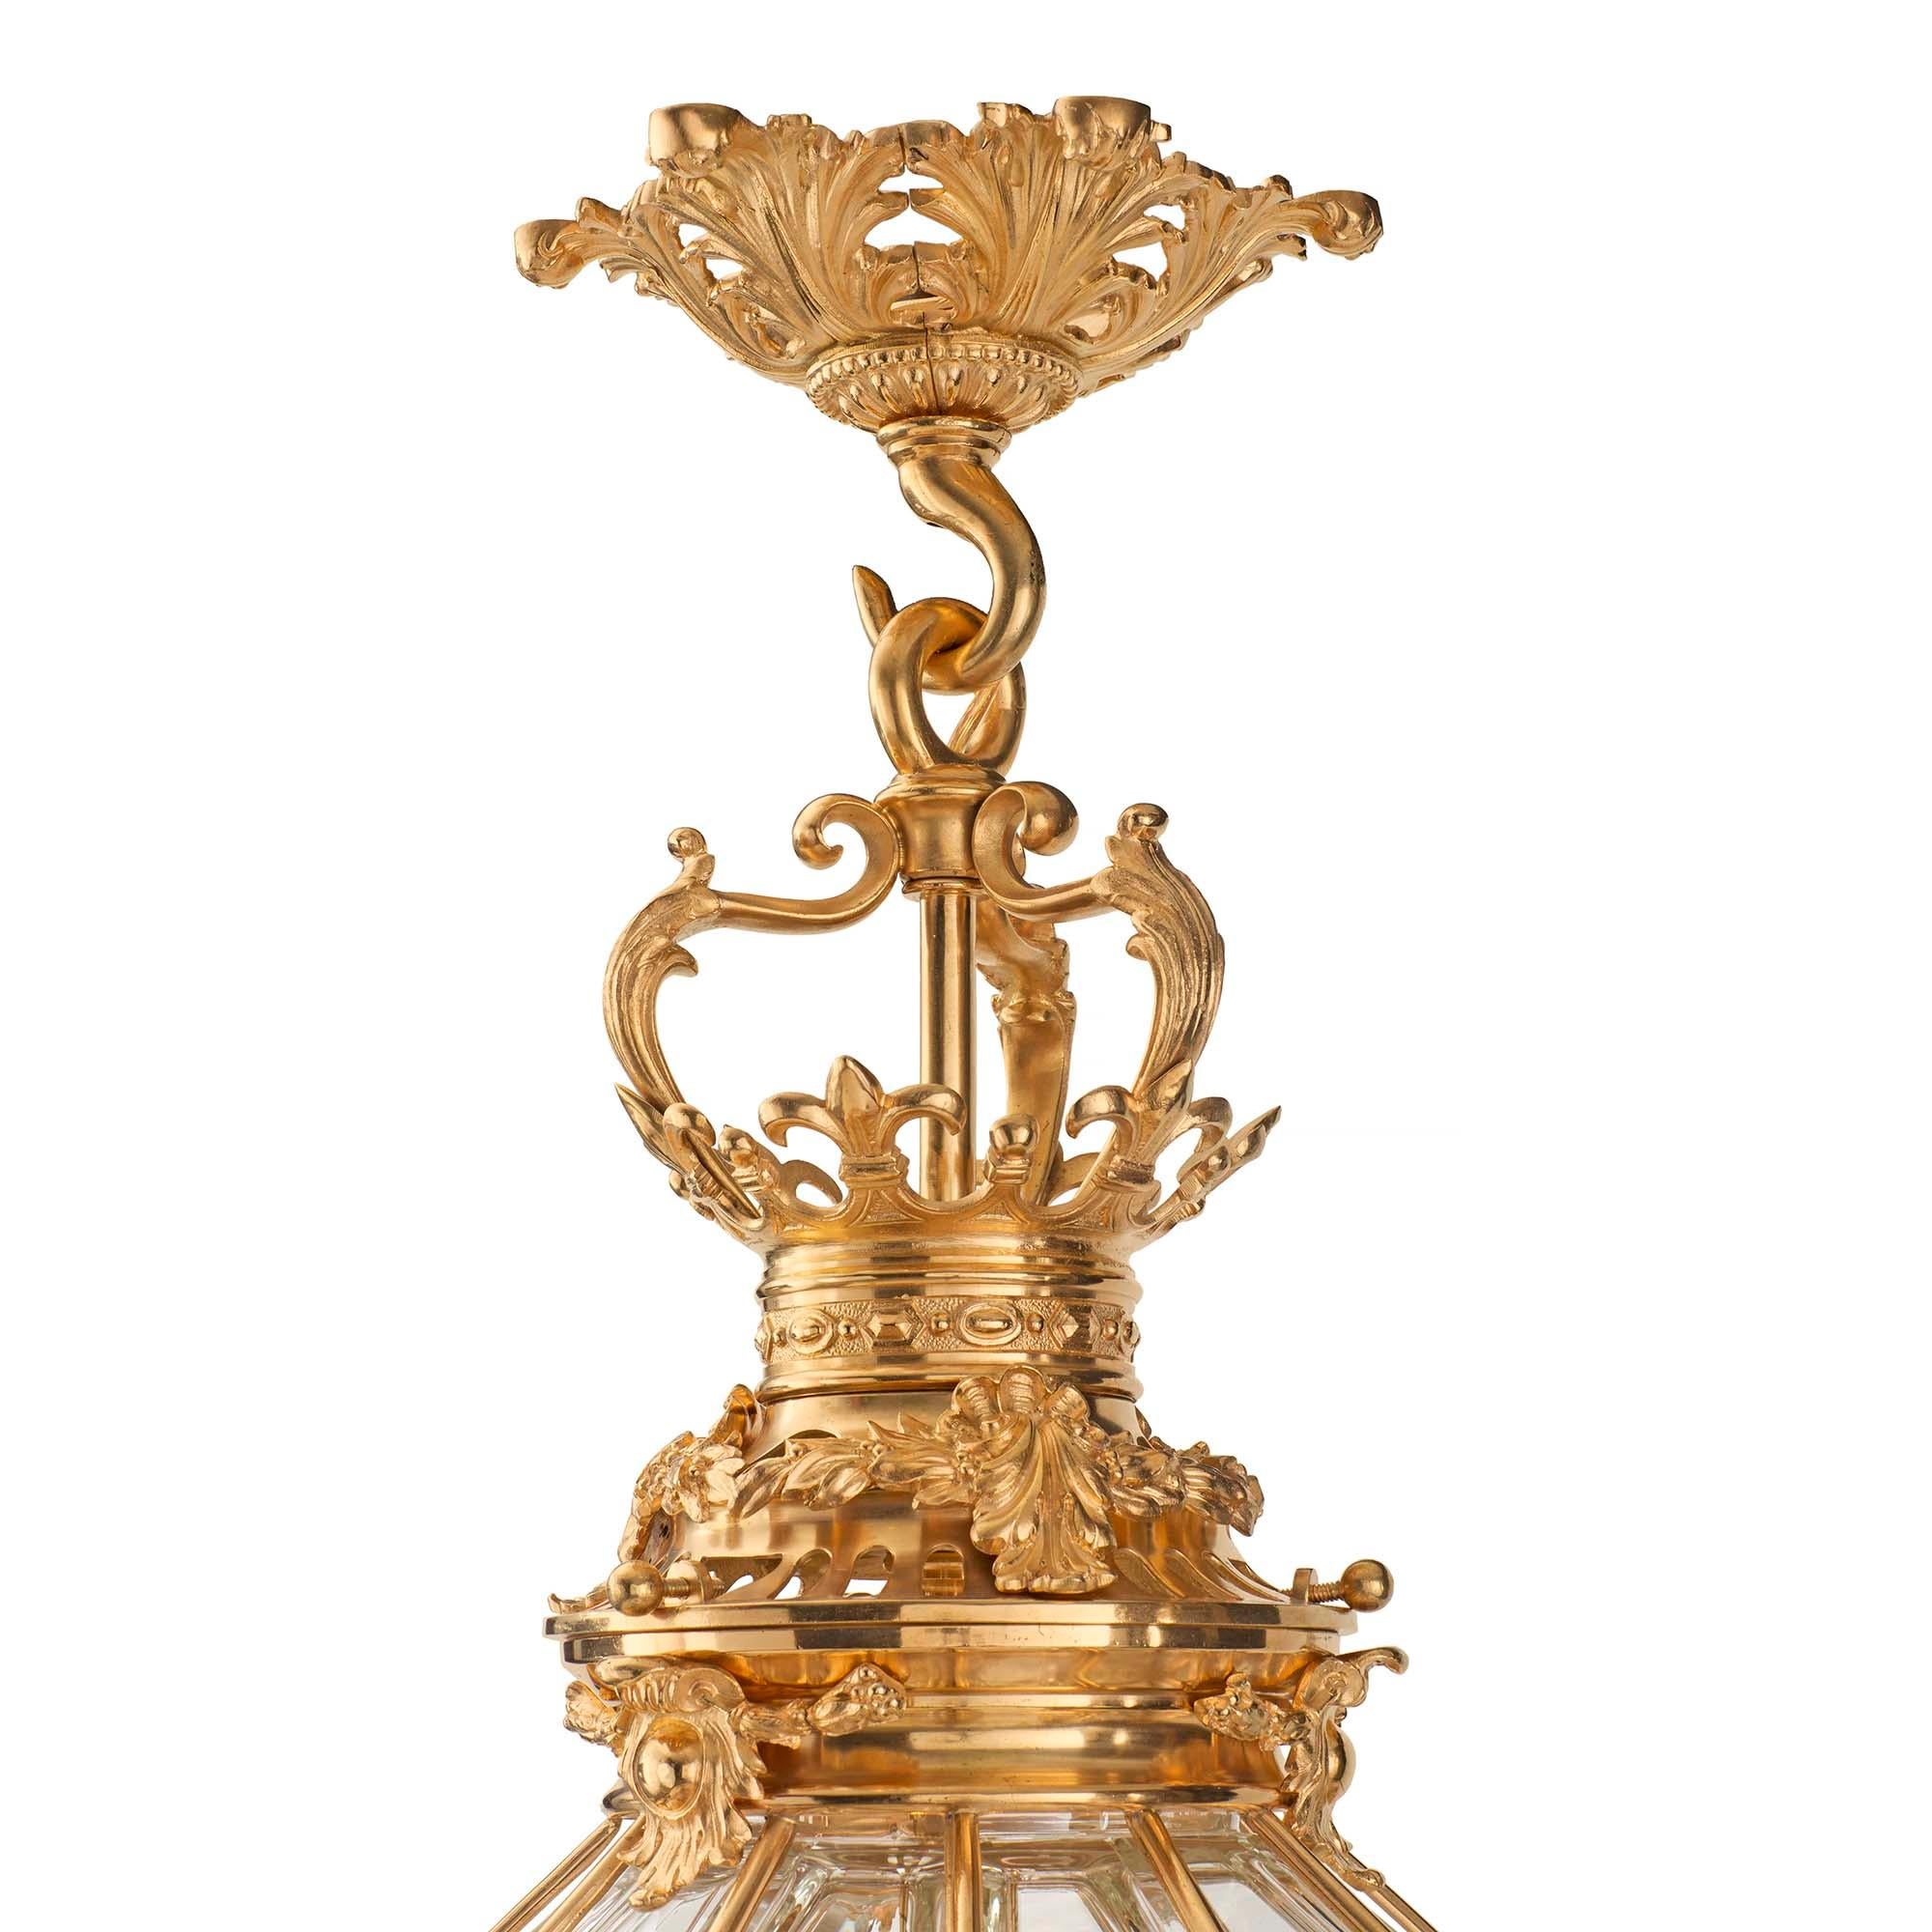 A spectacular and high quality French 19th century Louis XIV st. ormolu and crystal lantern. The lantern is modeled off a lantern still situated in the Palais de Versailles, which was featured in Henry Havard's 19th century Ameublement dictionary